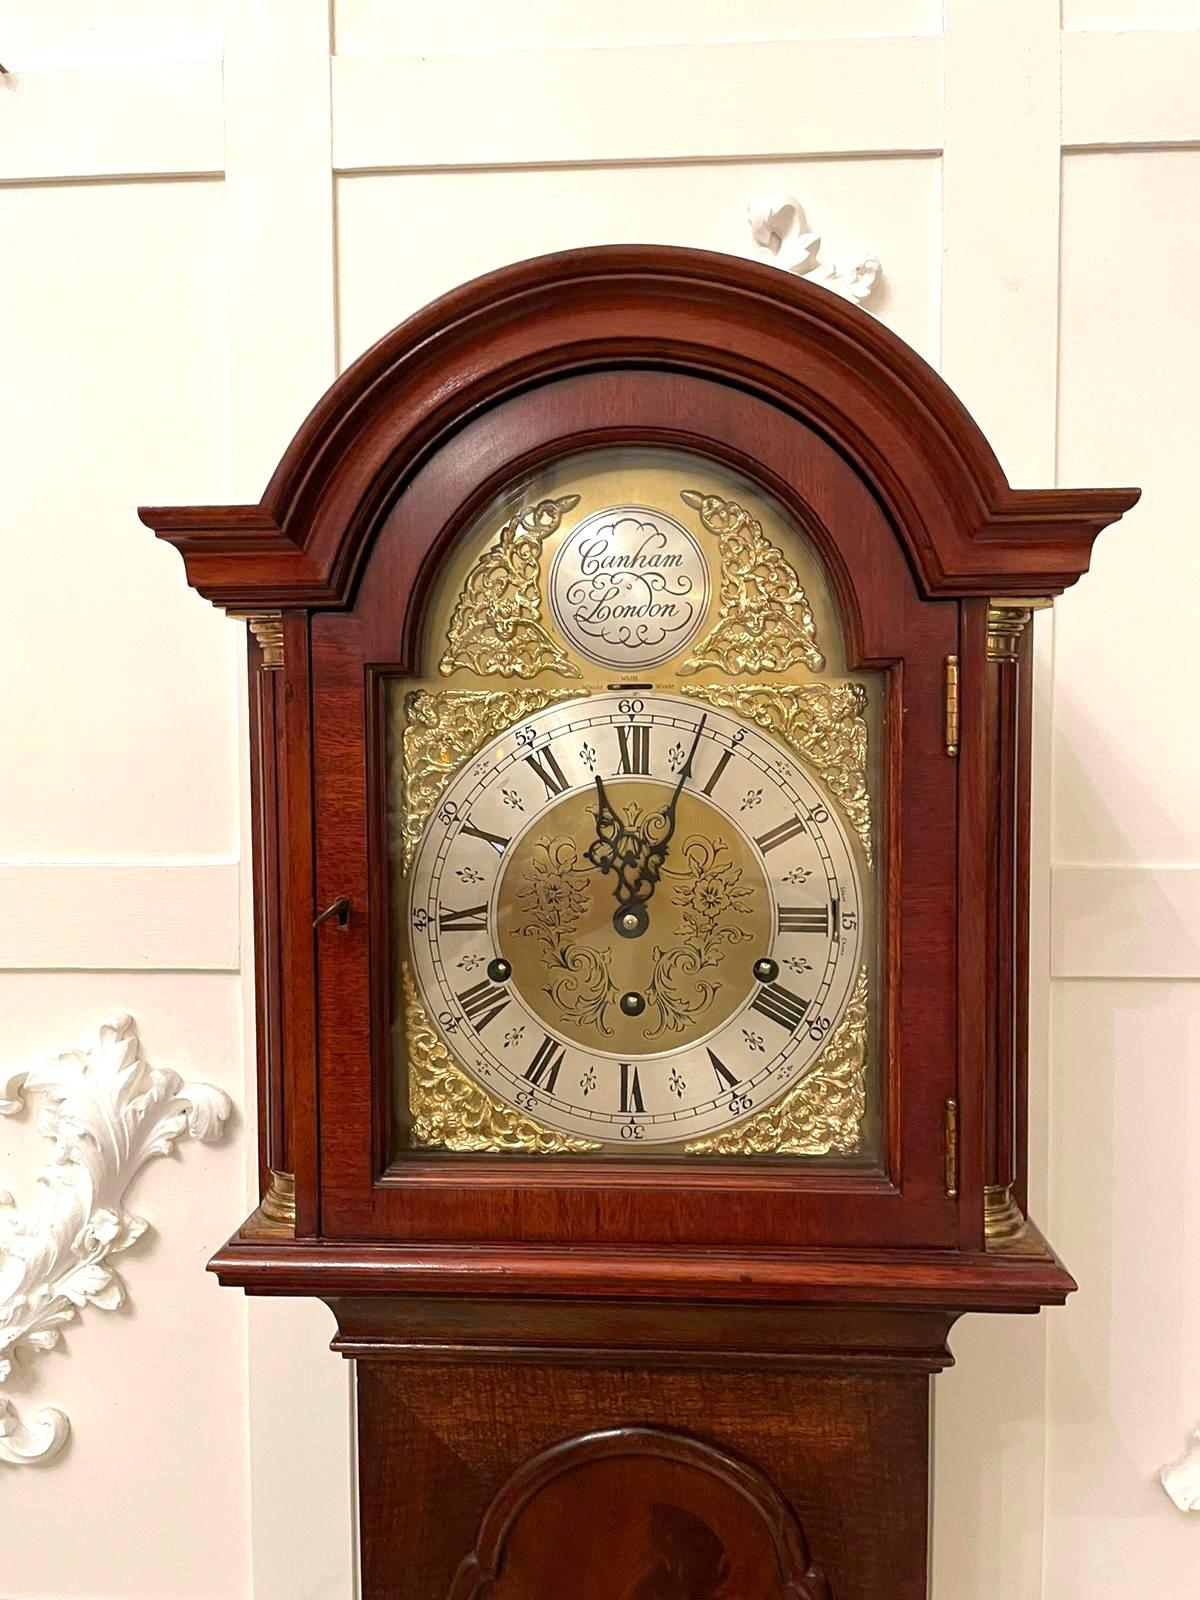 Outstanding quality antique mahogany eight day triple chiming Grandmother clock having an outstanding quality mahogany case with a shaped arched top glazed and mahogany door flanked by turned mahogany columns with brass caps. The door opens to